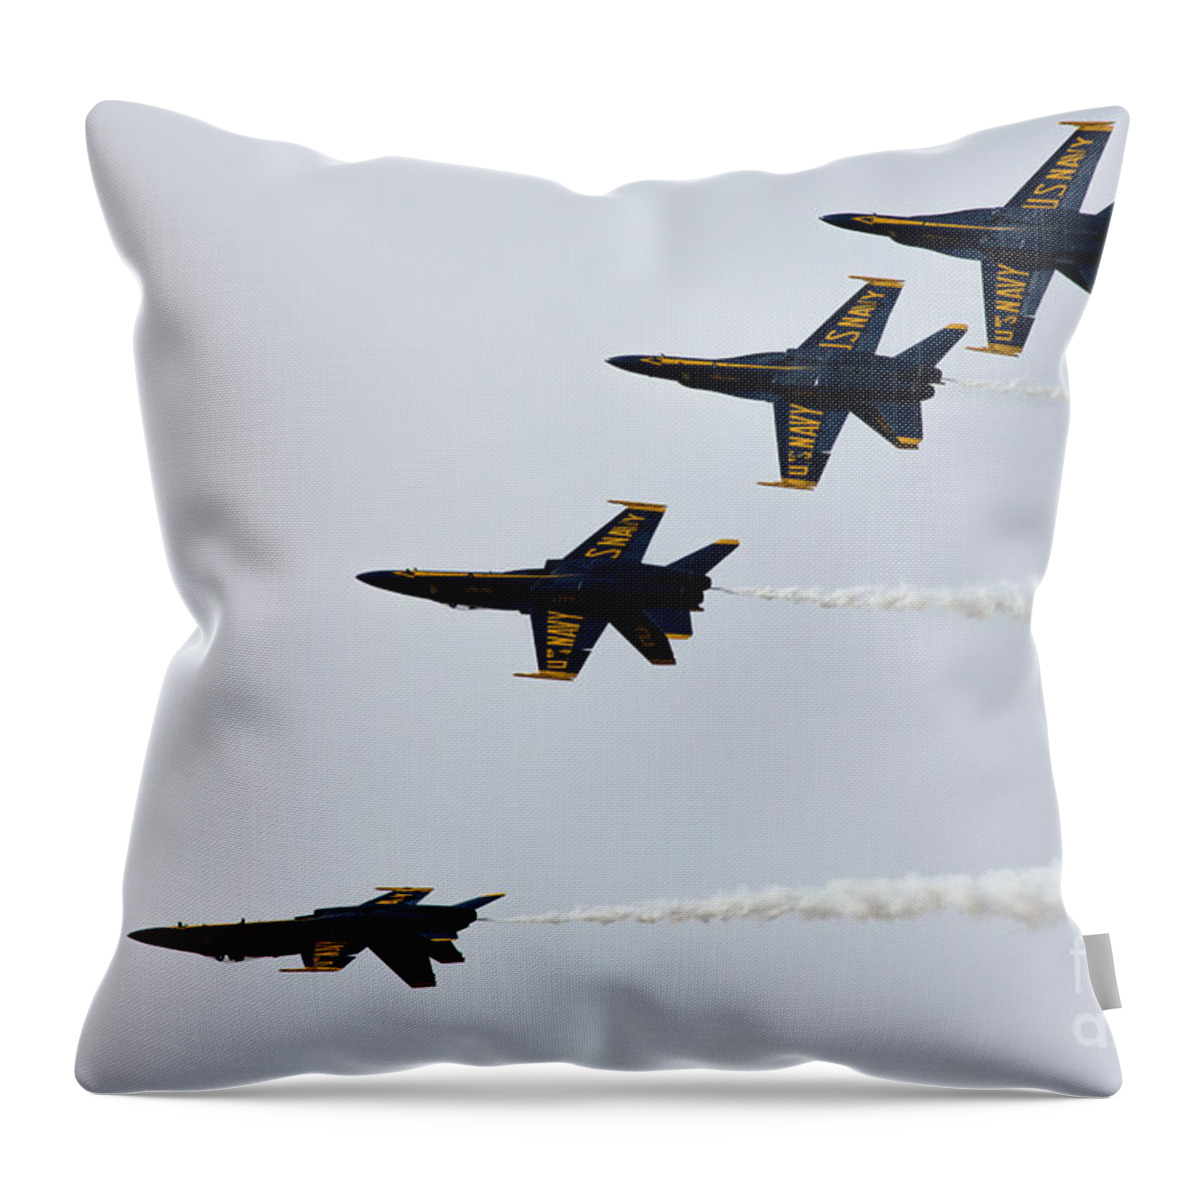 Blue Angels Throw Pillow featuring the photograph Blue Angels Tuck Under Break by John Daly